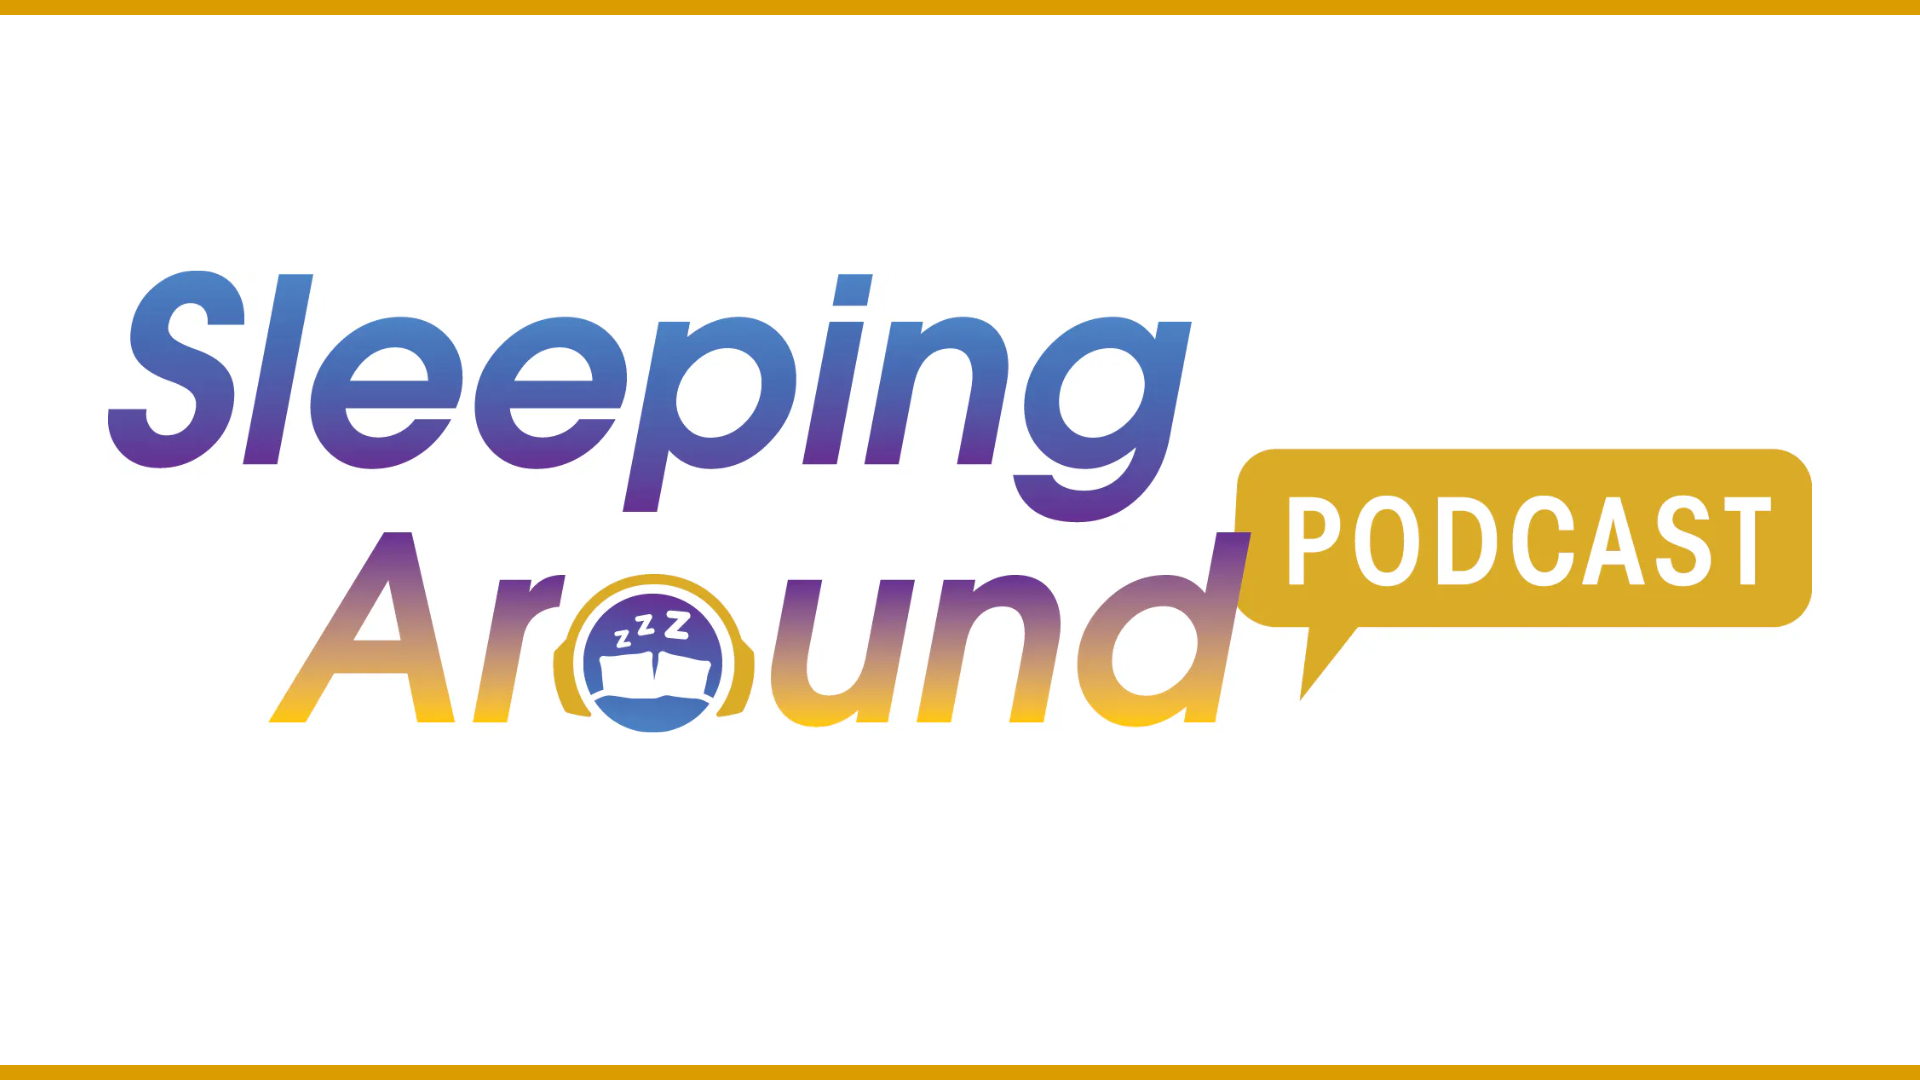 Sleeping Around the Podcast: Living with Narcolepsy & Cataplexy: The Patient's Perspective